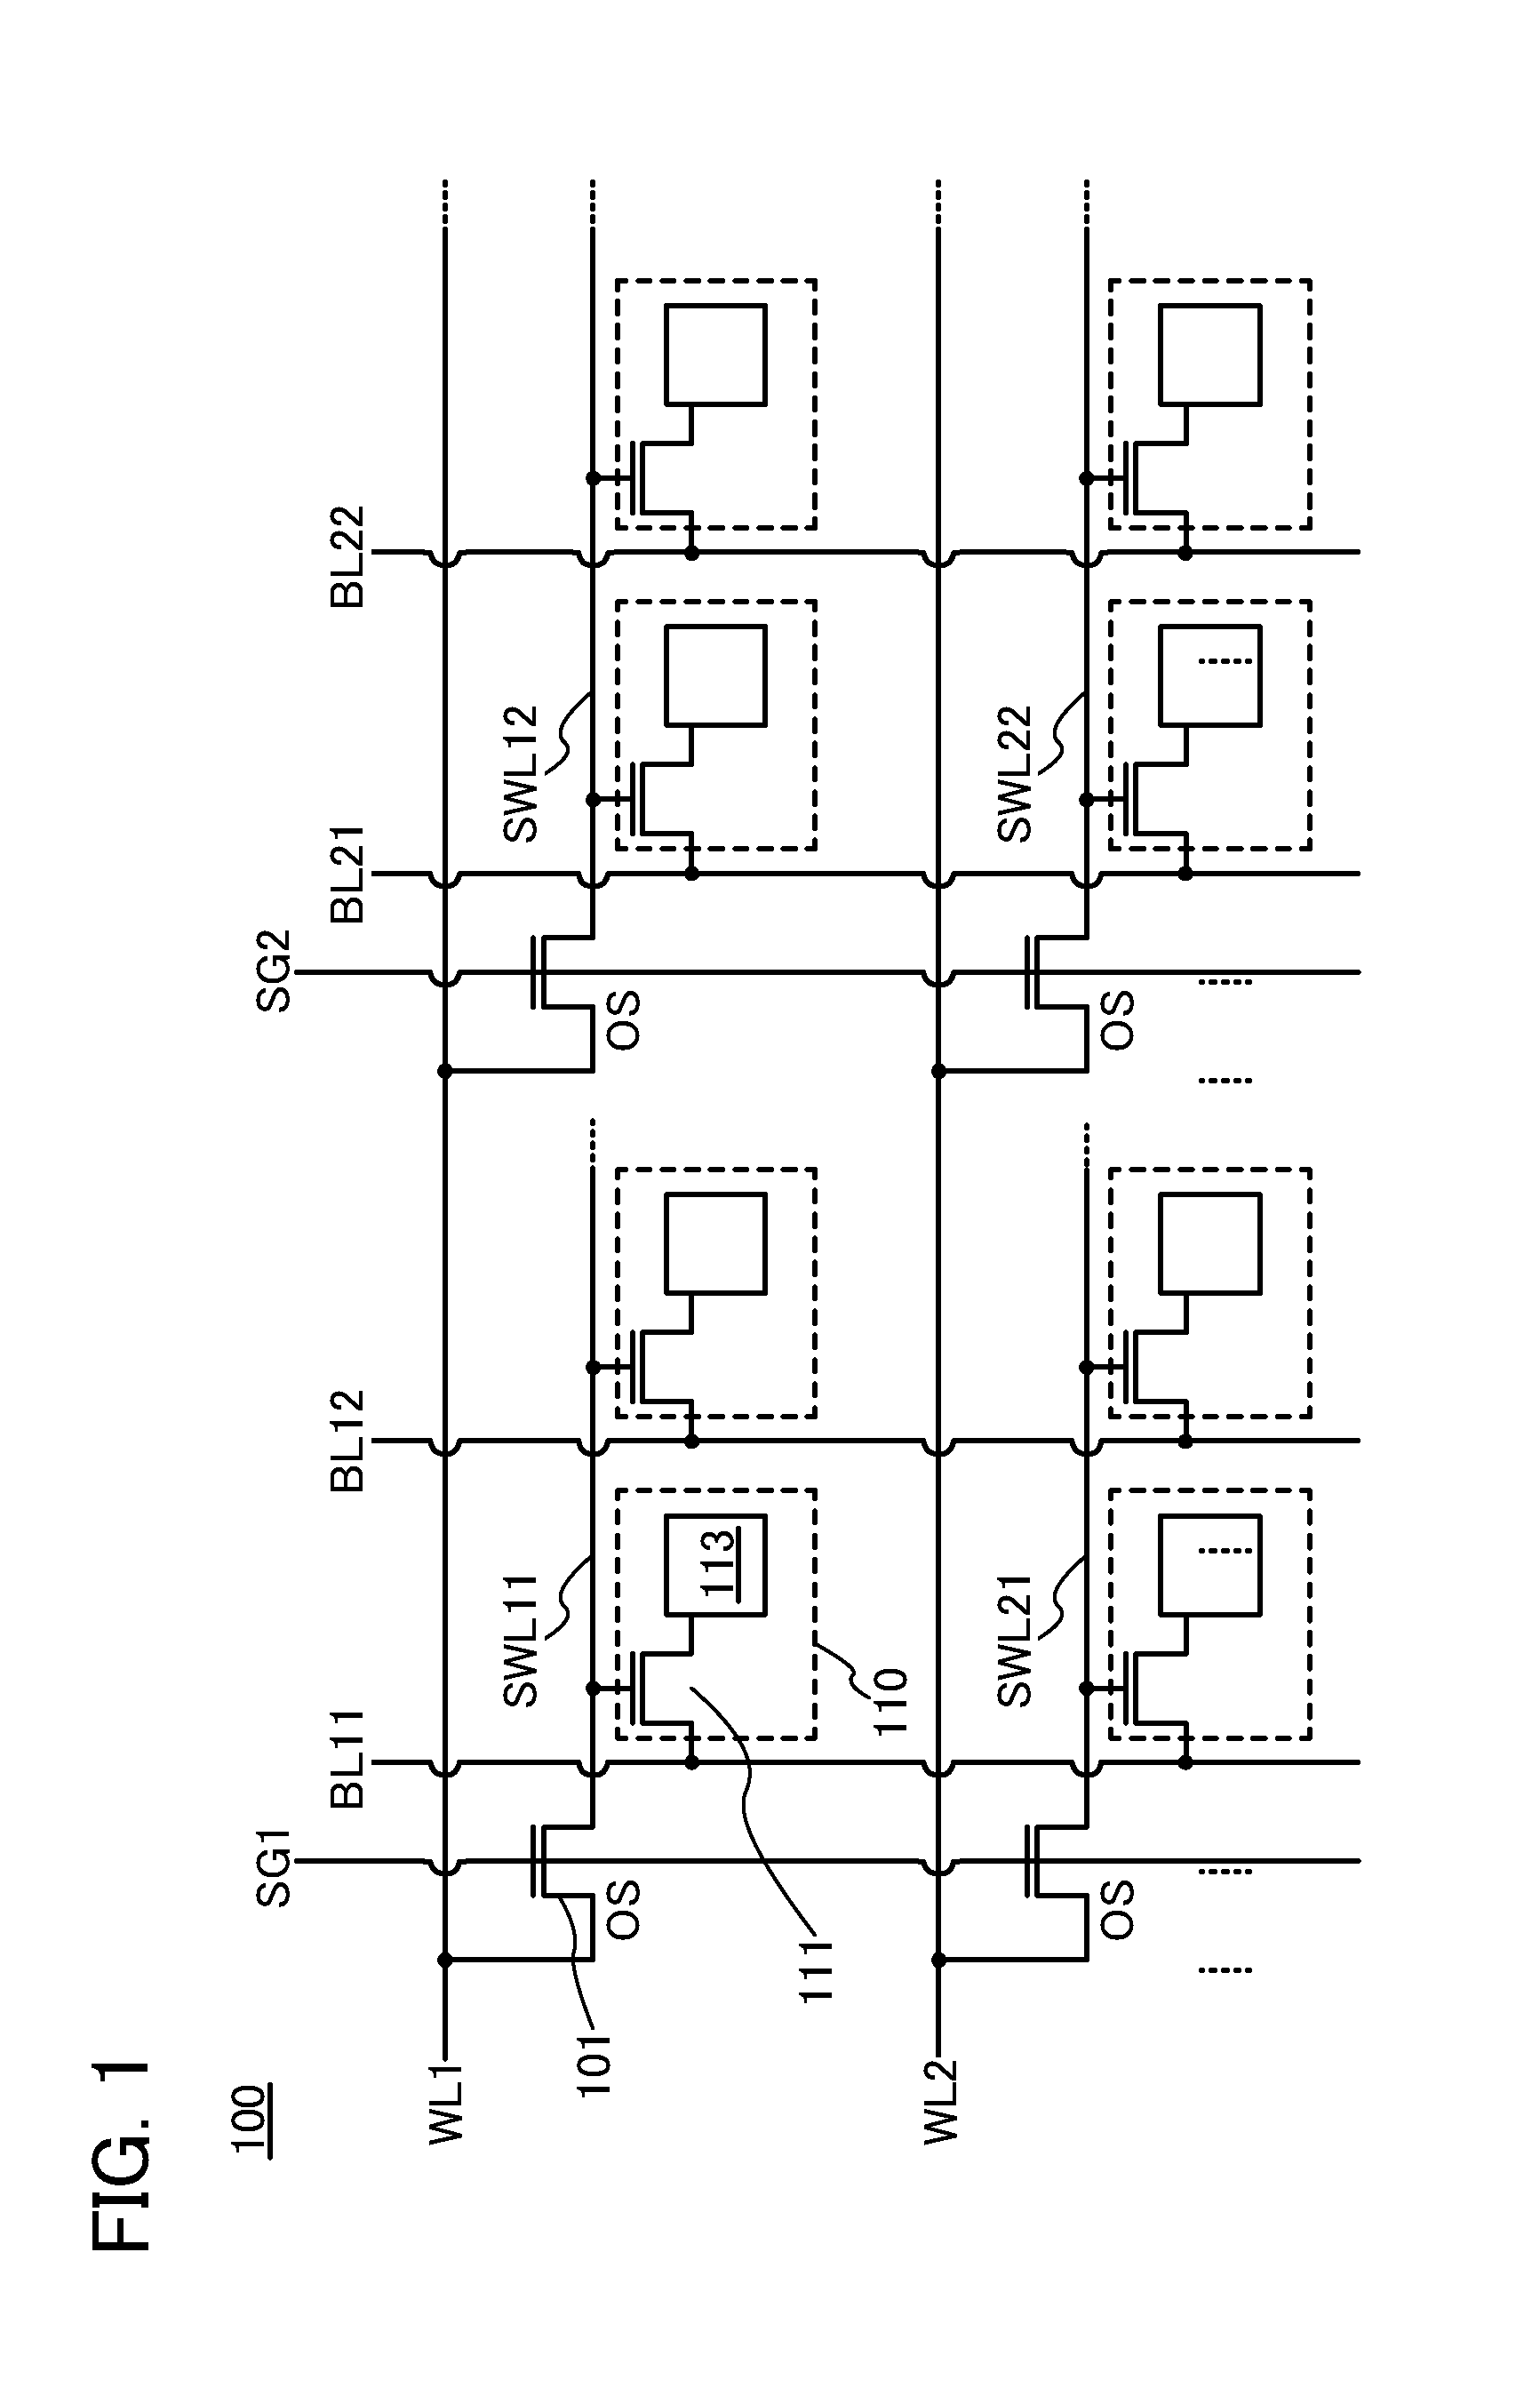 Word line divider and storage device